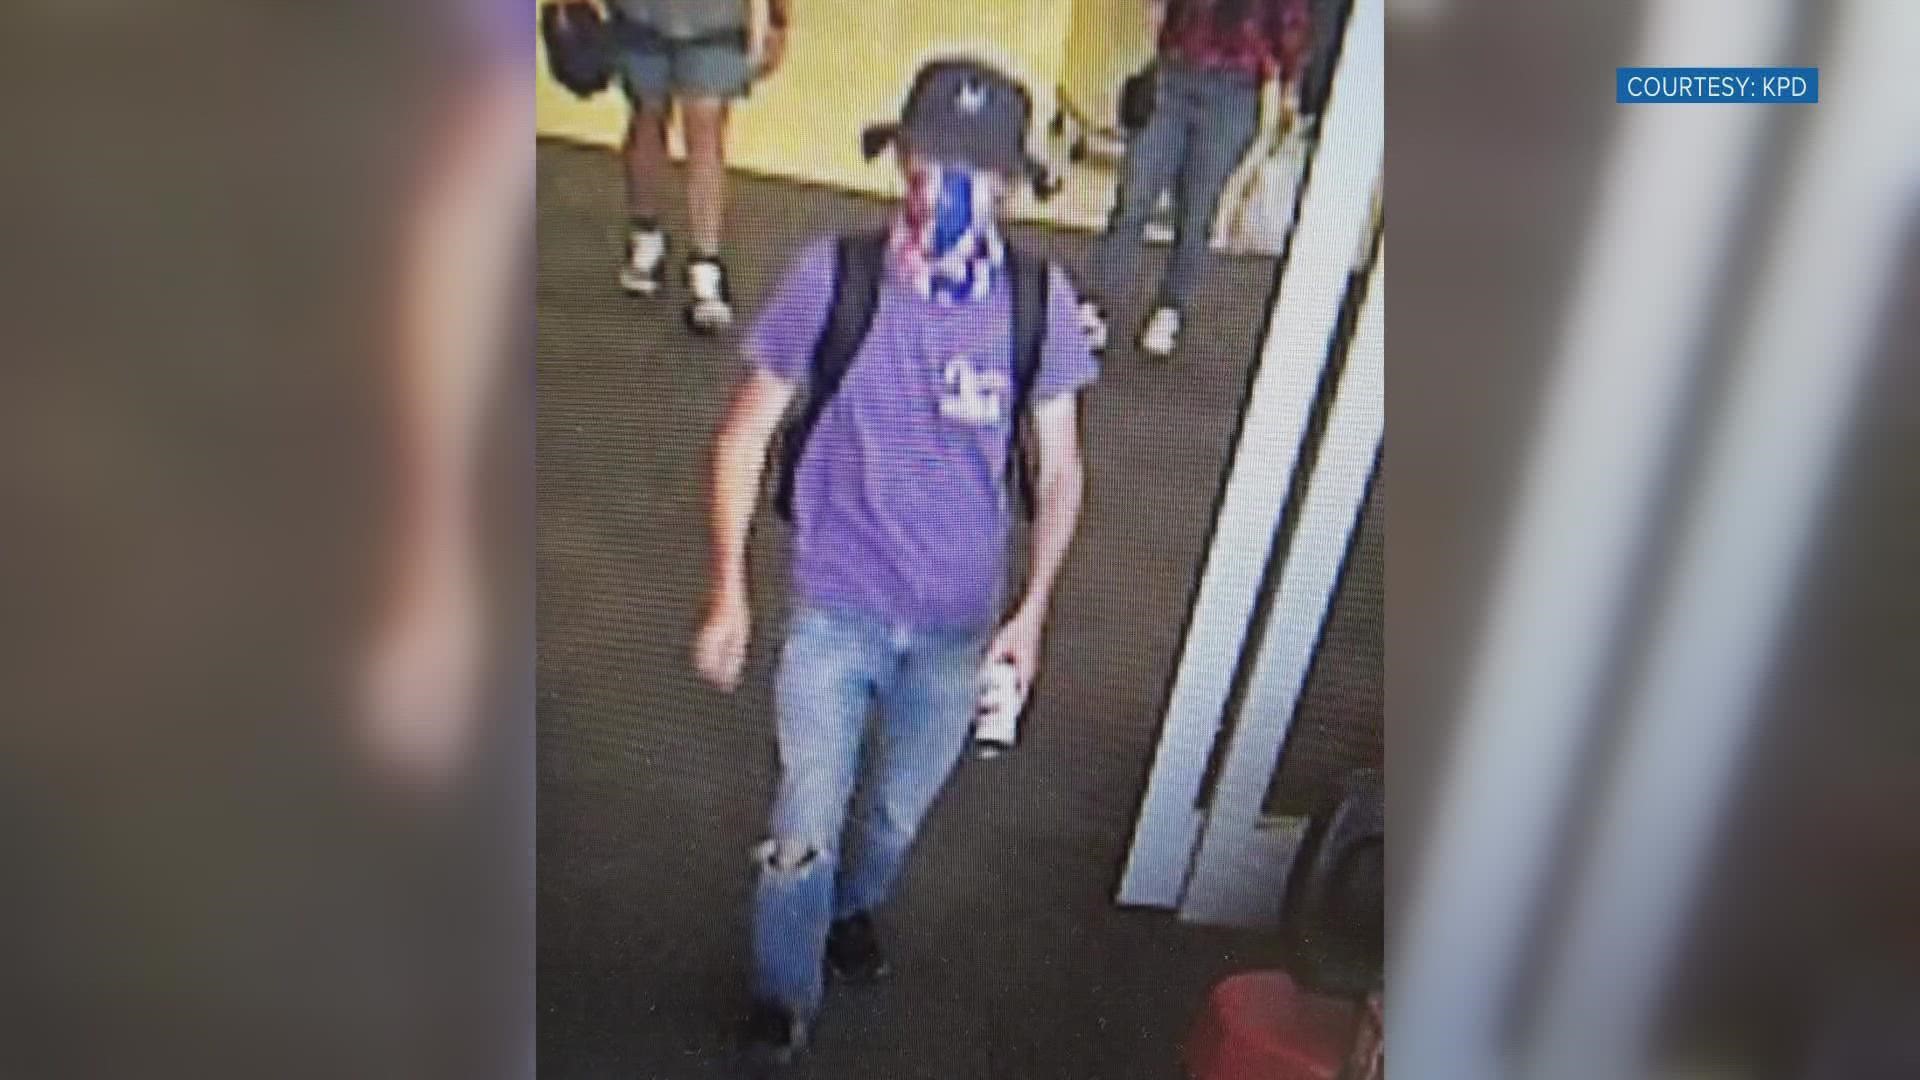 The suspect damaged over $3,800 worth of Pride Month merchandise, according to the Knoxville Police Department.